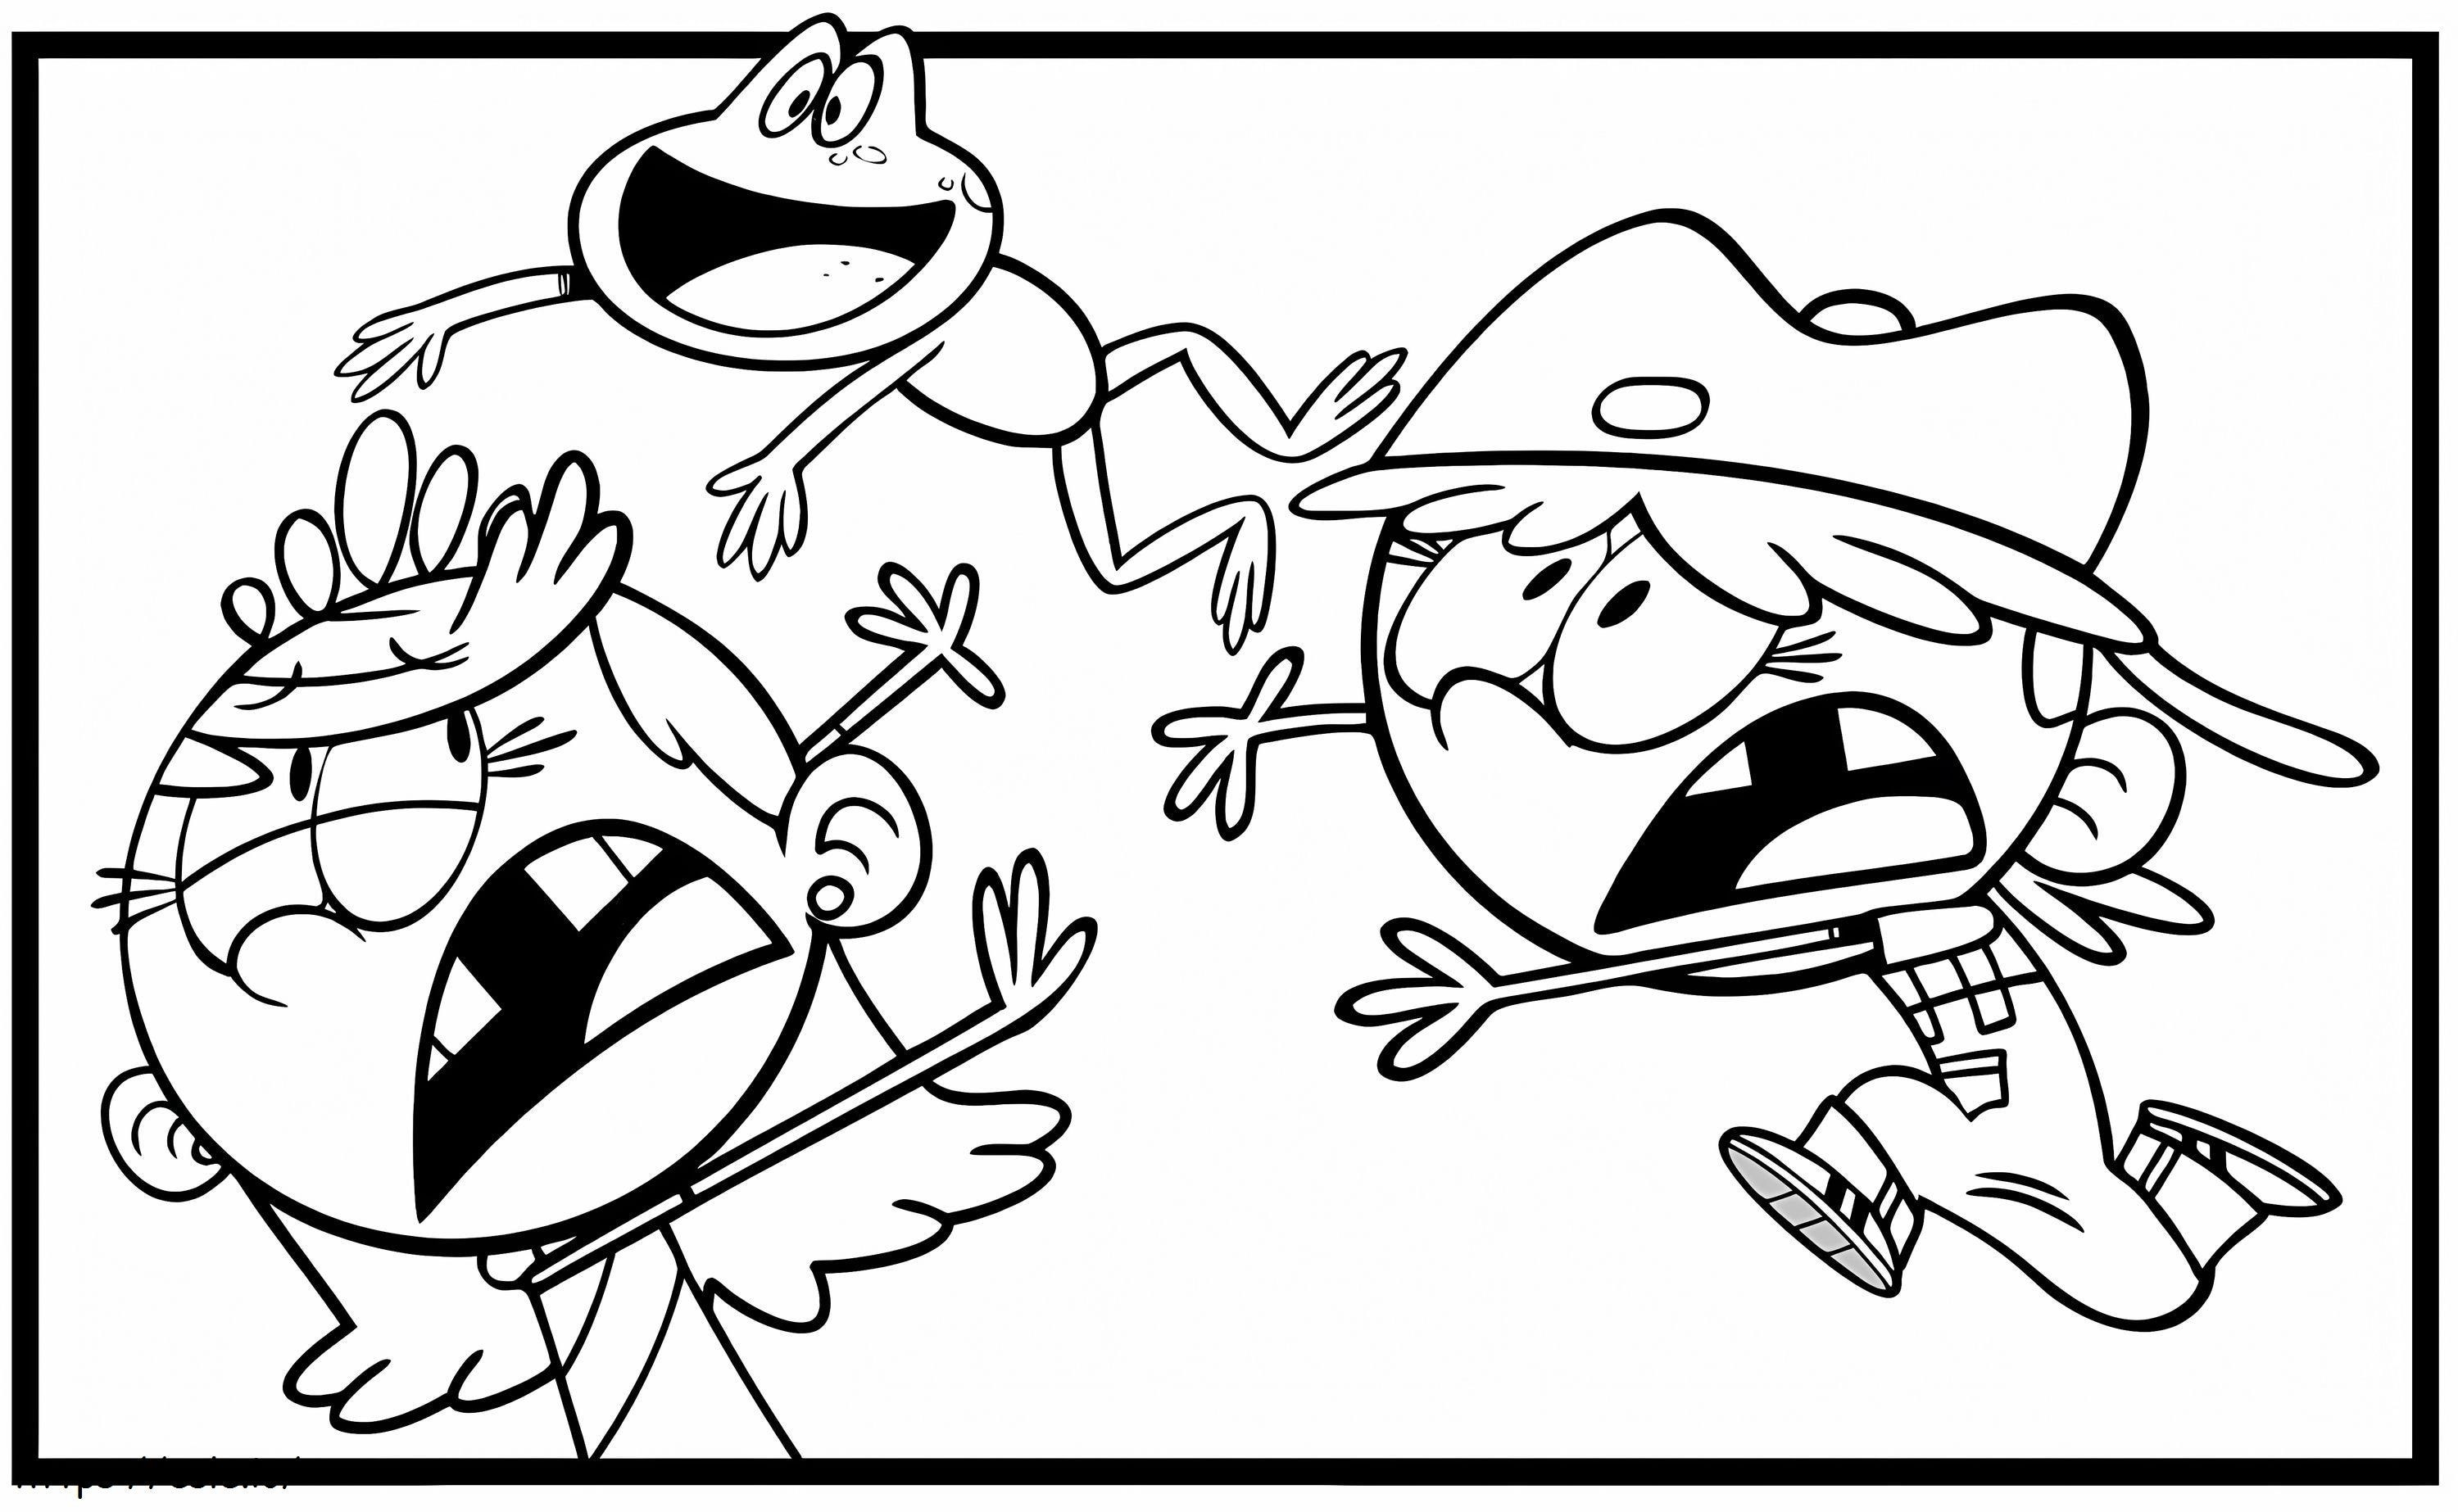 The Loud House 5 coloring page